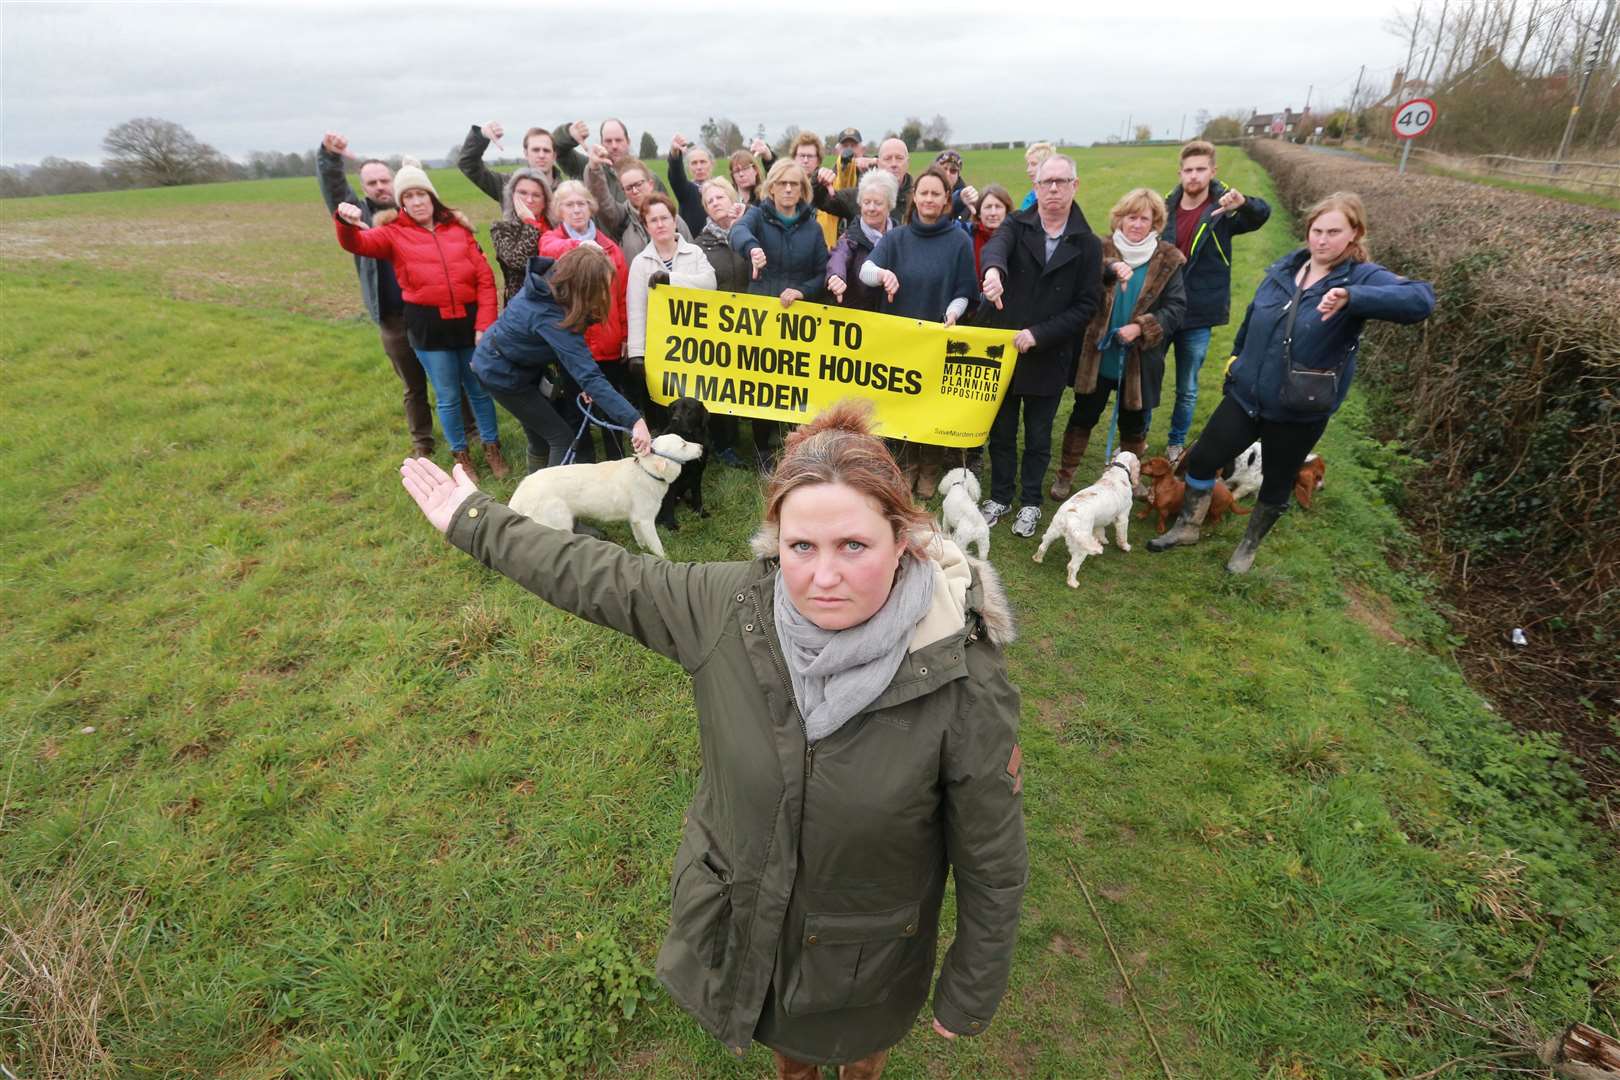 Campaigners on the land where 2,000 homes are proposed in the small Marden village. Picture: John Westhrop